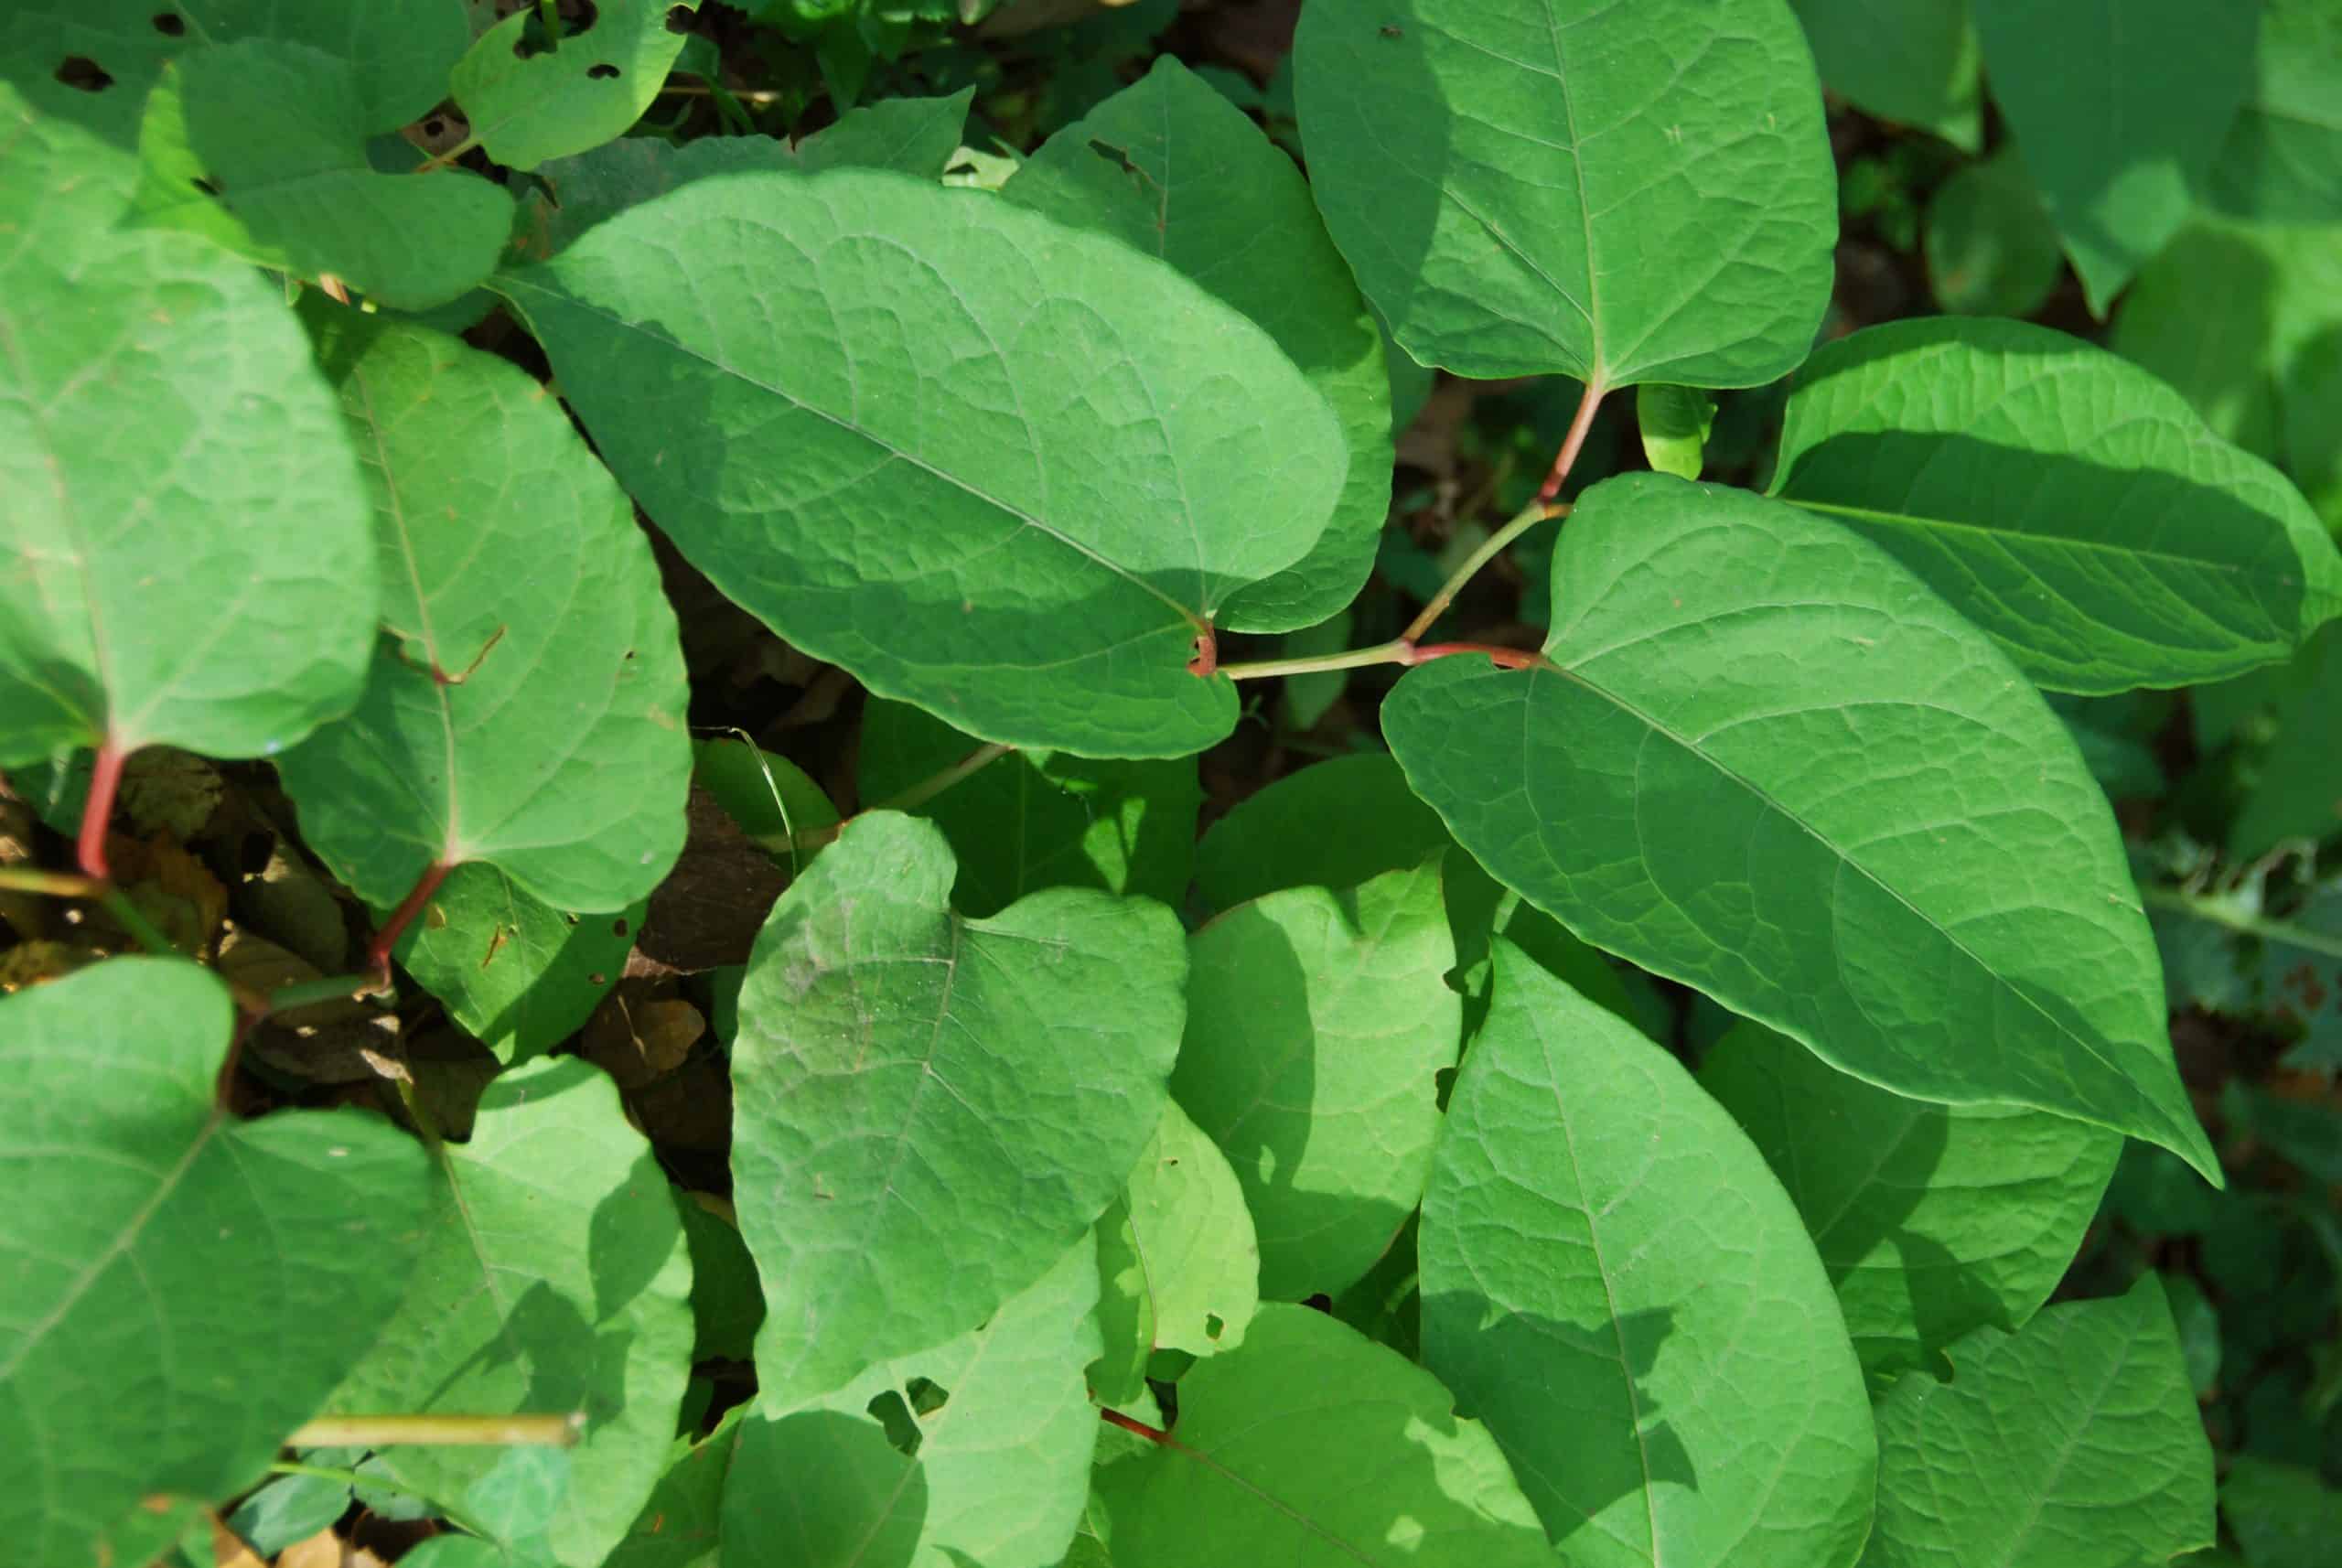 Invasive plant Japanese knotweed is now widespread and near damn impossible to remove scaled